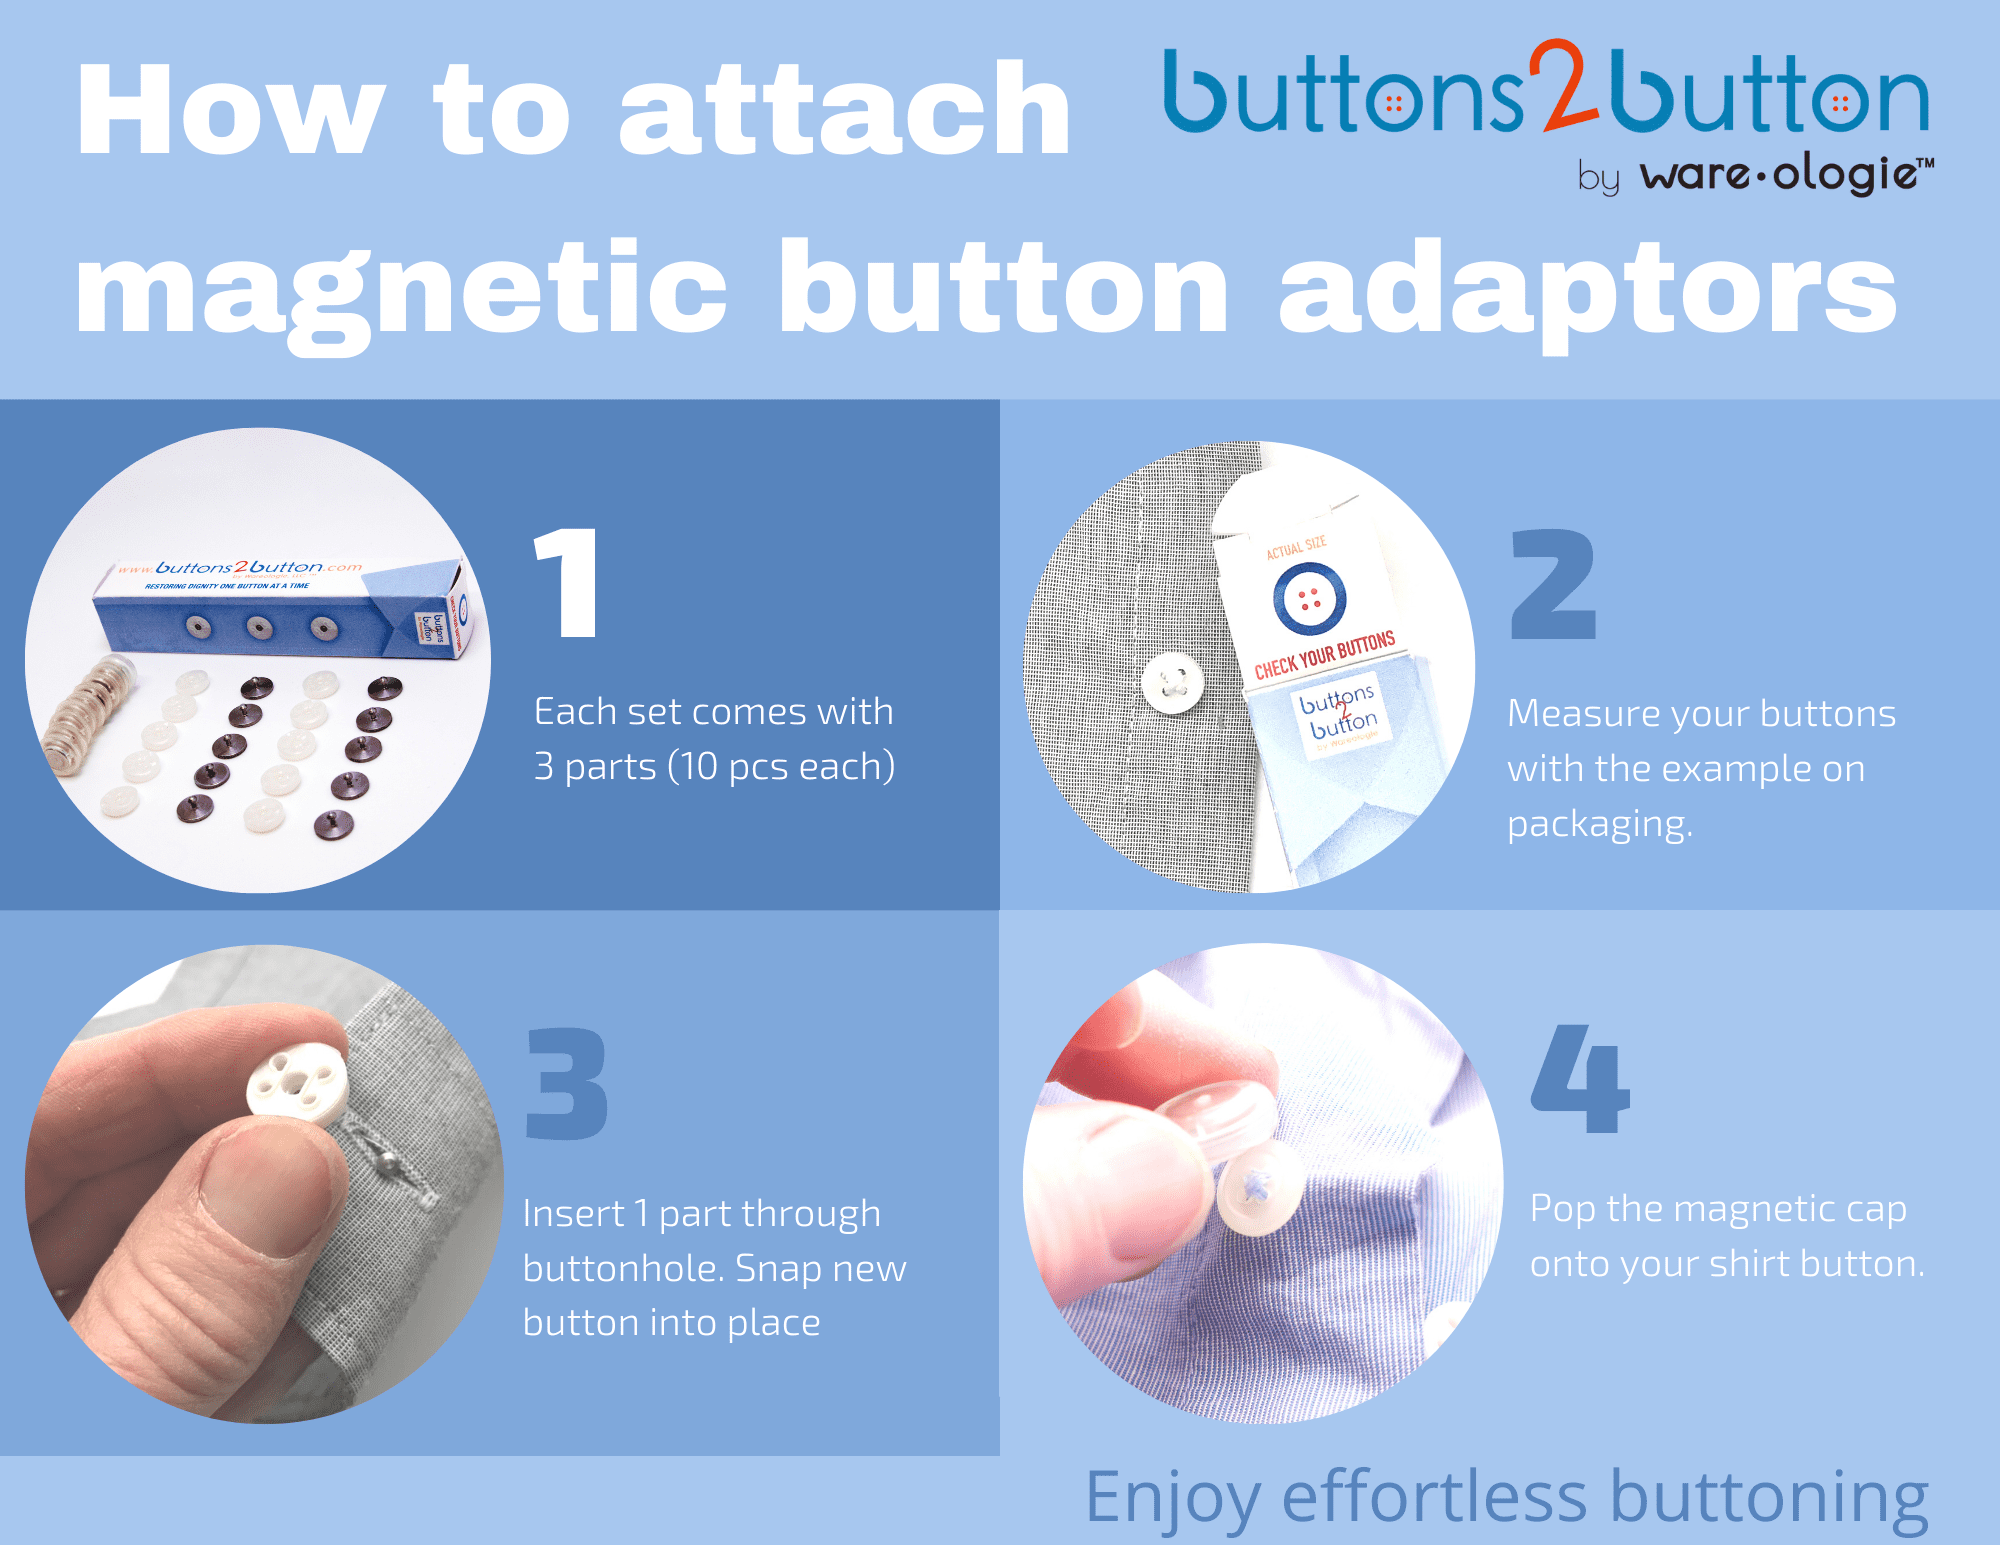 Instructions to Install Buttons 2 Button Magnetic Adaptor Dressing Aid 